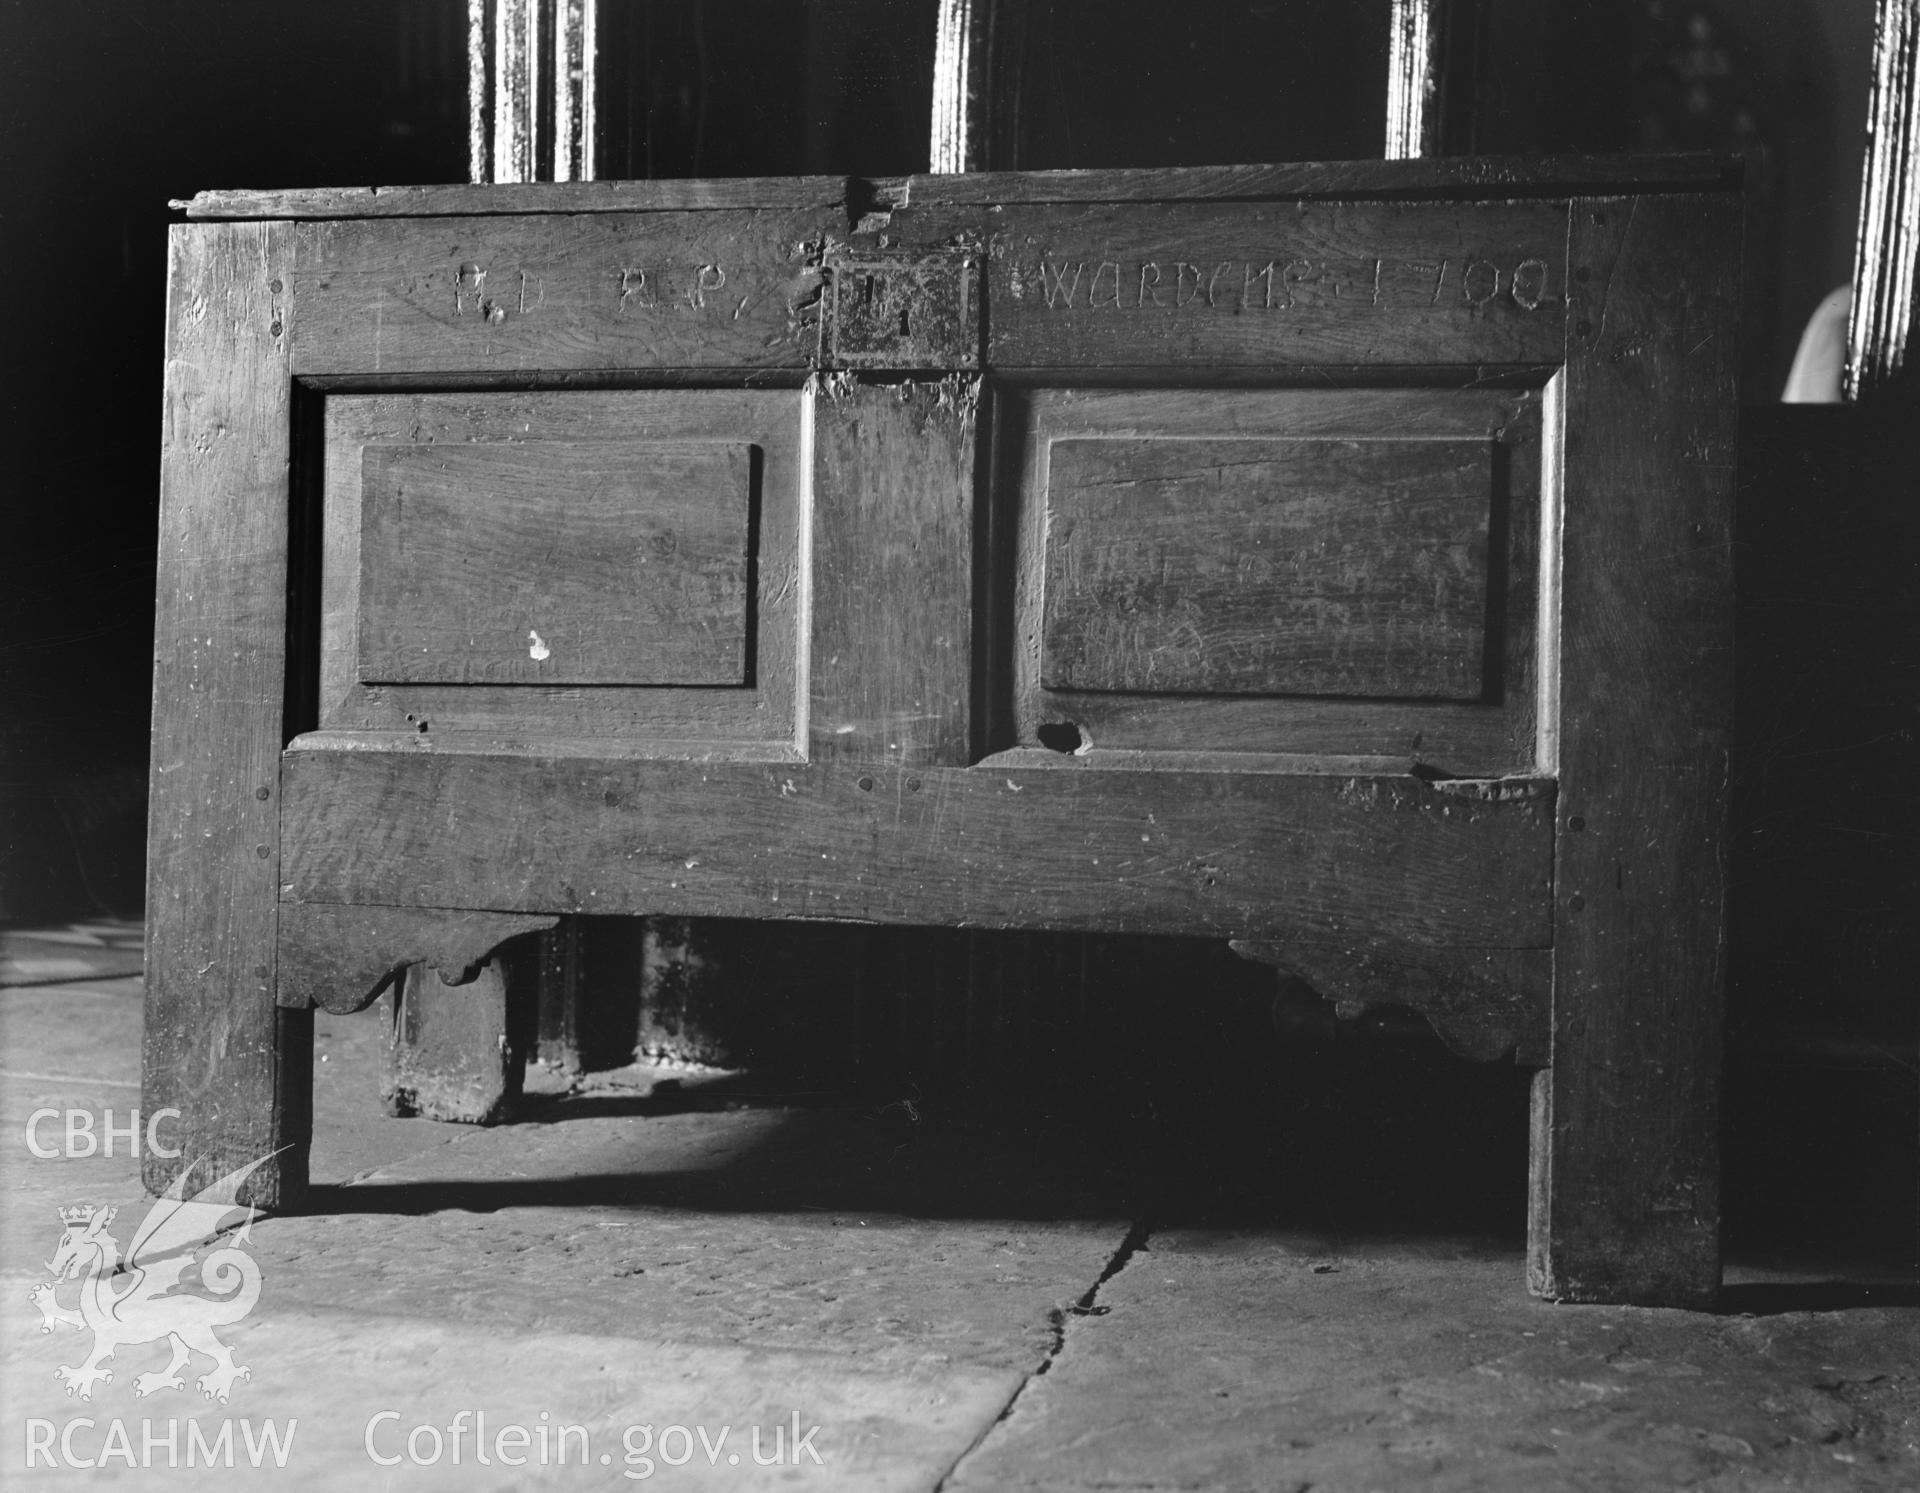 View of engraved chest at St Benedicts Church, Gyffin, taken 30.09.48.